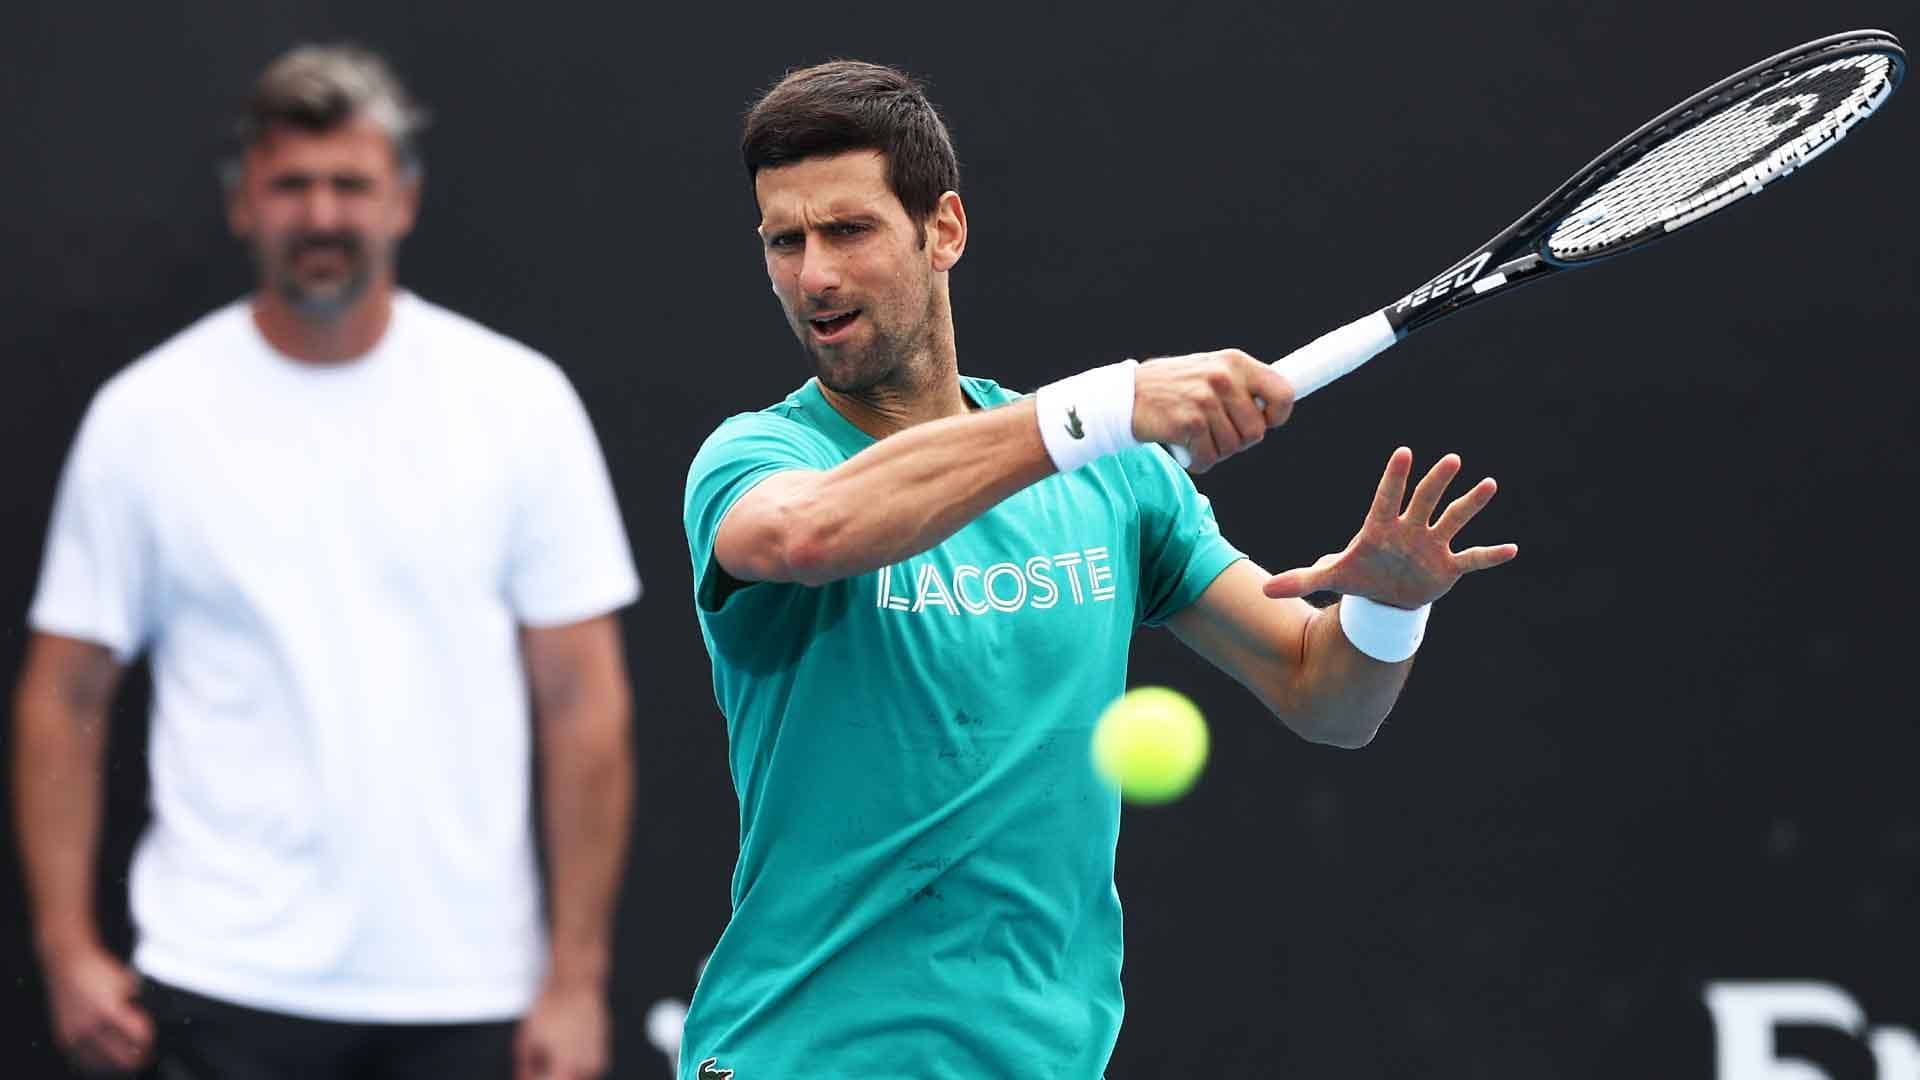 Novak Djokovic will face Jeremy Chardy in his first-round match at the Australian Open.